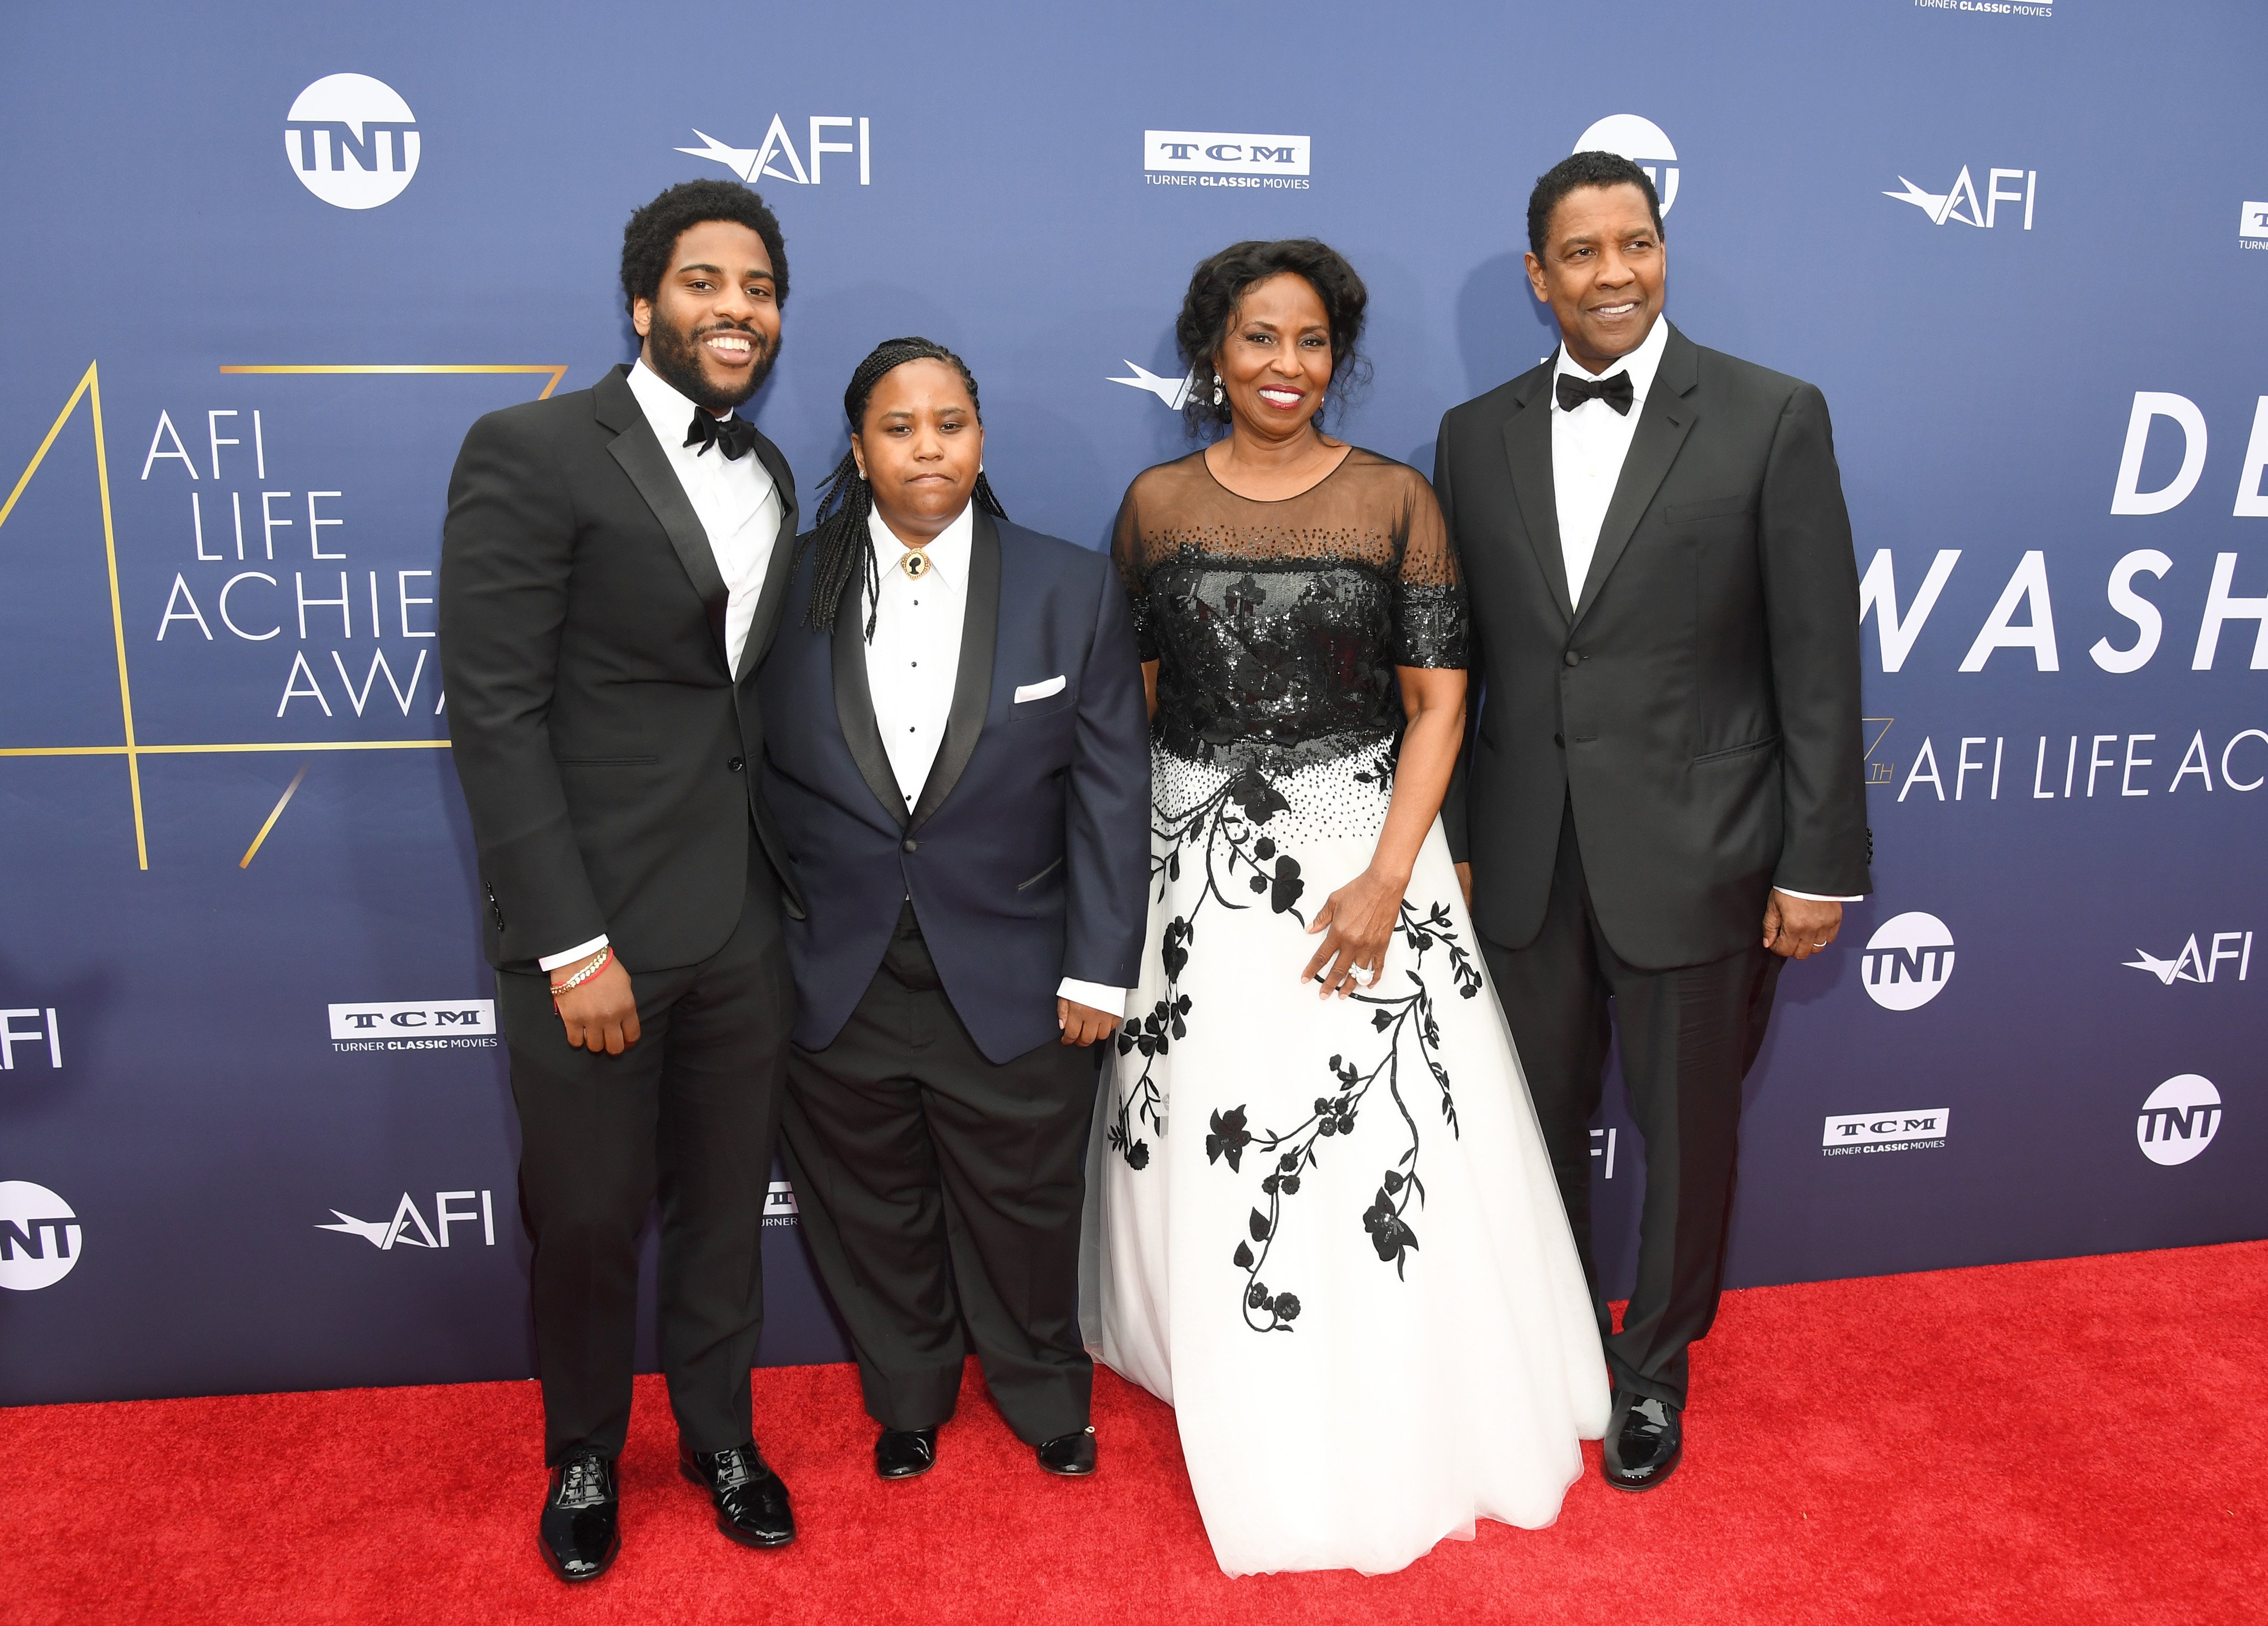 Denzel Washington is accompanied by his wife Pauletta Washington, their son Malcolm and daughter, Katia when he was honored with the 47th American Film Institute's Lifetime Achievement Award in Hollywood on June 6, 2019. | Photo: Getty Images